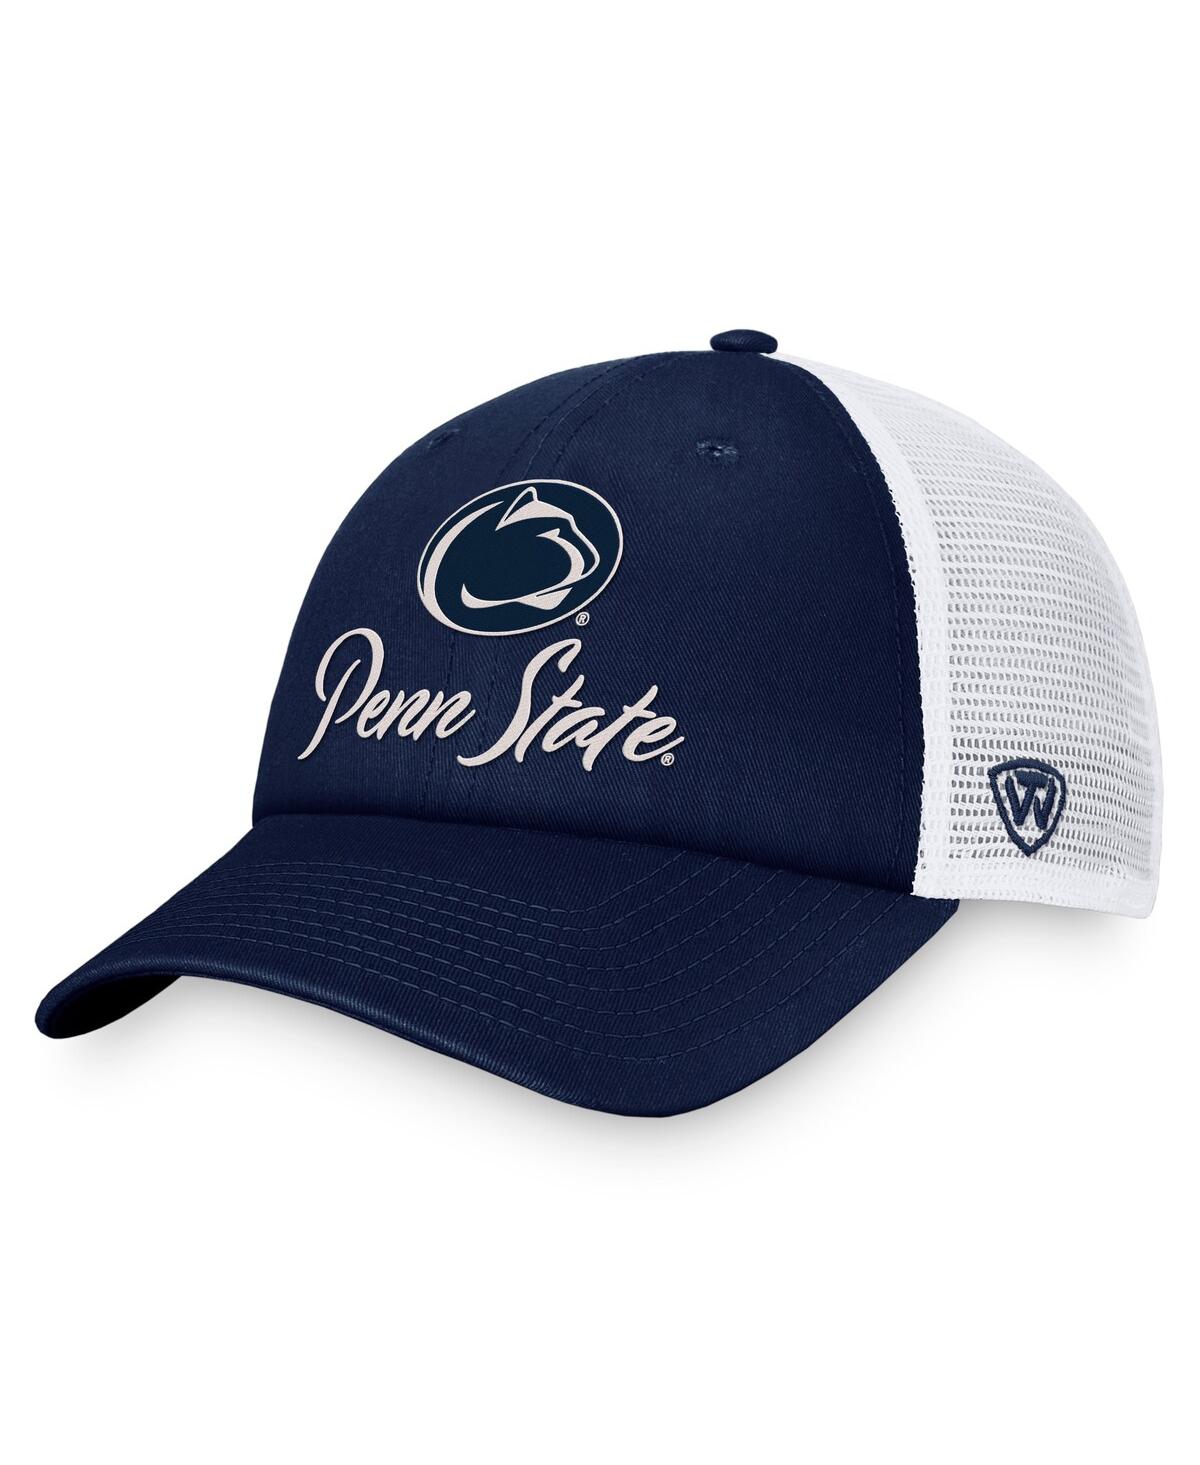 Shop Top Of The World Women's  Navy, White Penn State Nittany Lions Charm Trucker Adjustable Hat In Navy,white